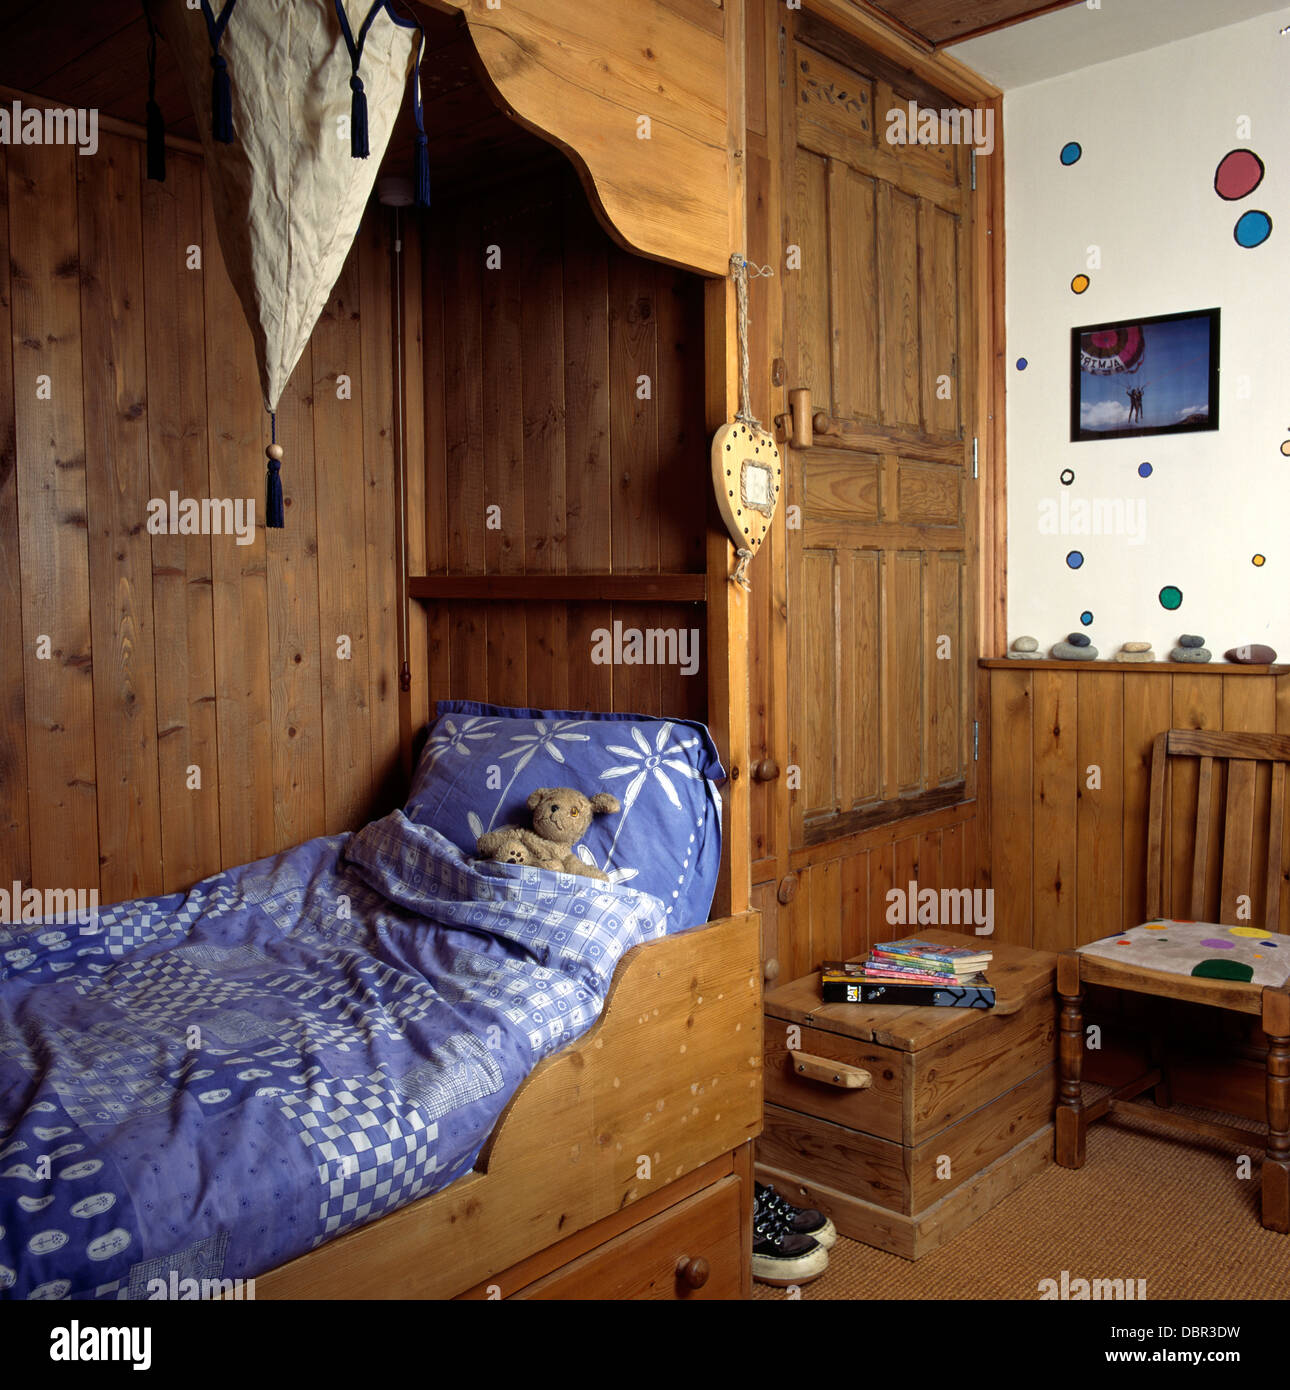 Blue+white duvet and pillow on wooden bed enclosed with wood paneling in child's bedroom with wooden box step to door Stock Photo